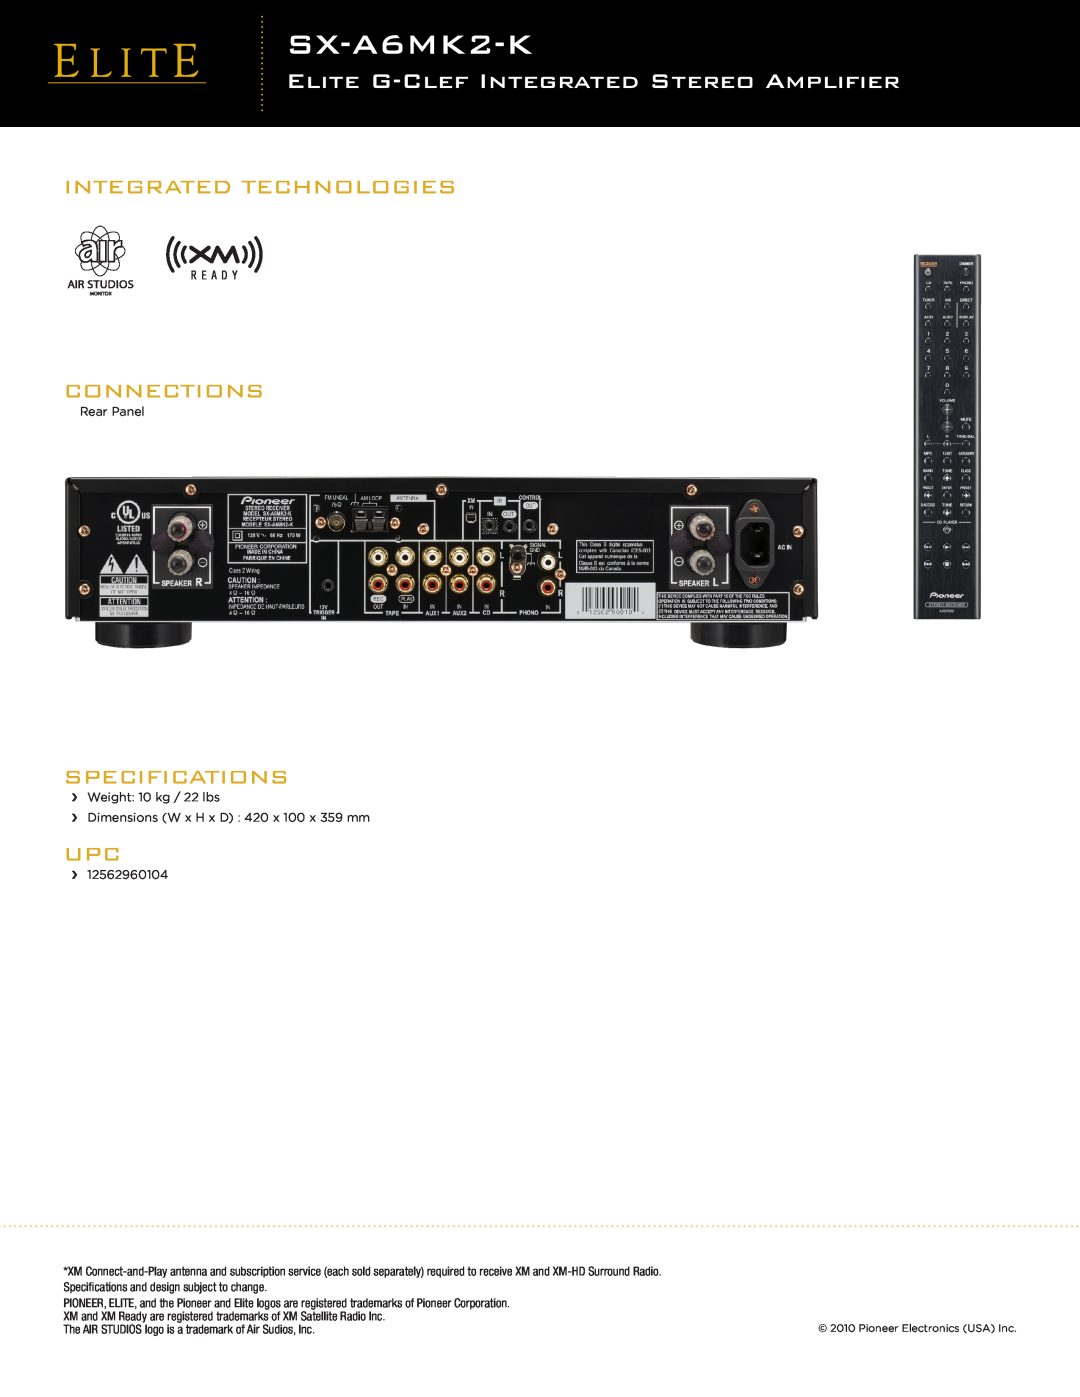 Pioneer SX-A6MK2-K manual Integrated Technologies Connections, Specifications, Elite G-Clefintegrated Stereo Amplifier 